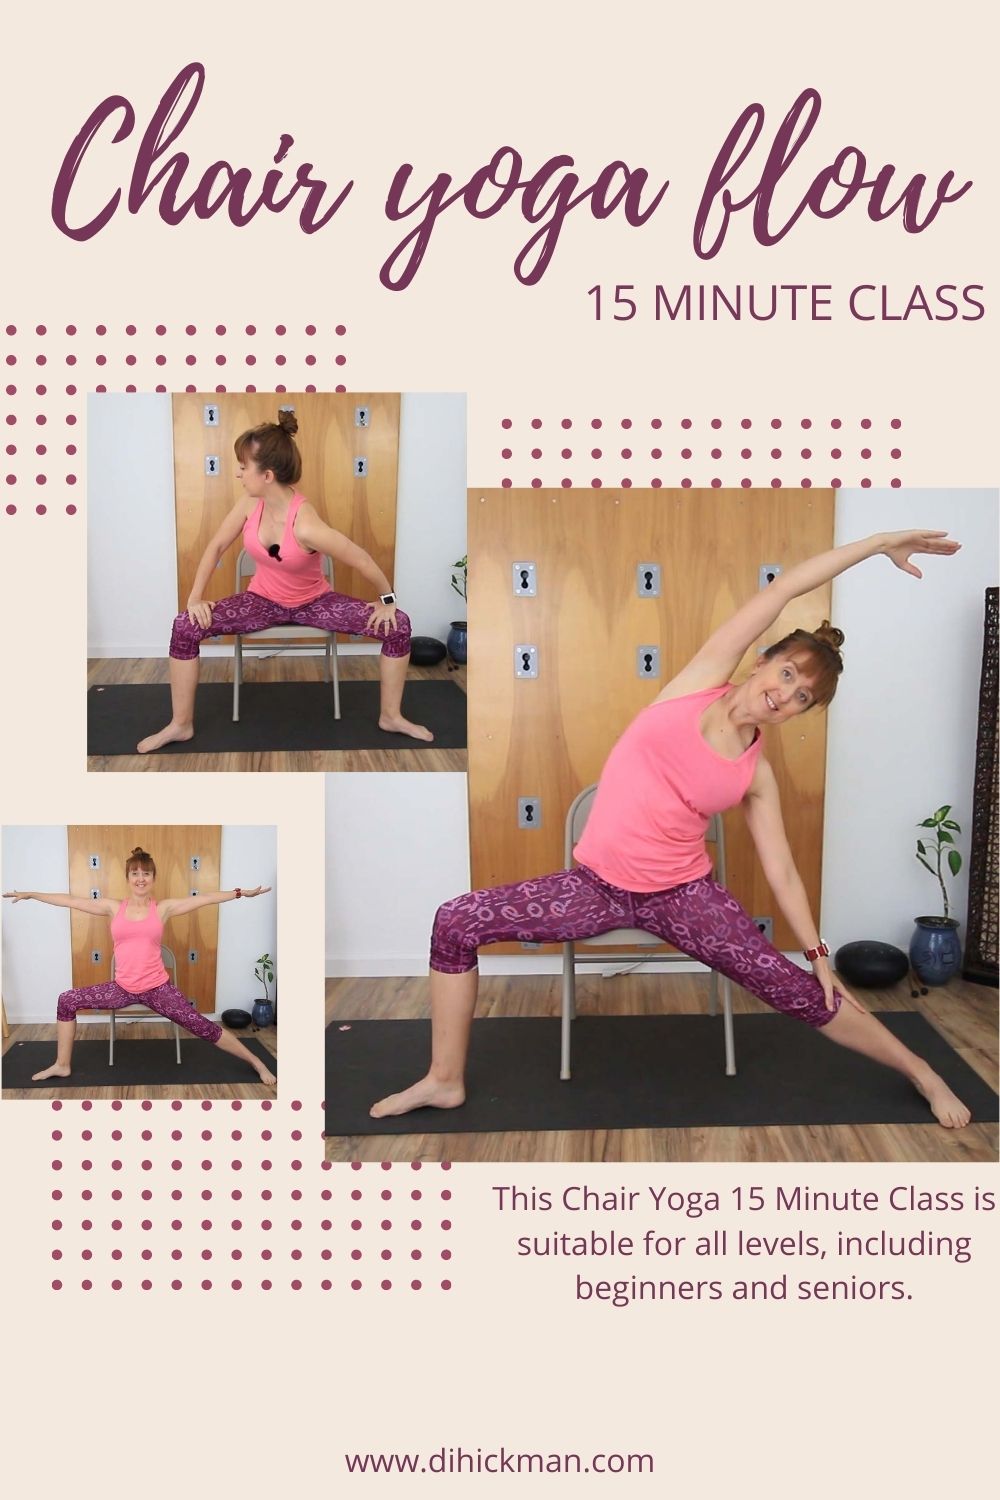 5 Chair Yoga Poses You Can Do Anywhere & 5 Benefits of Seated Yoga